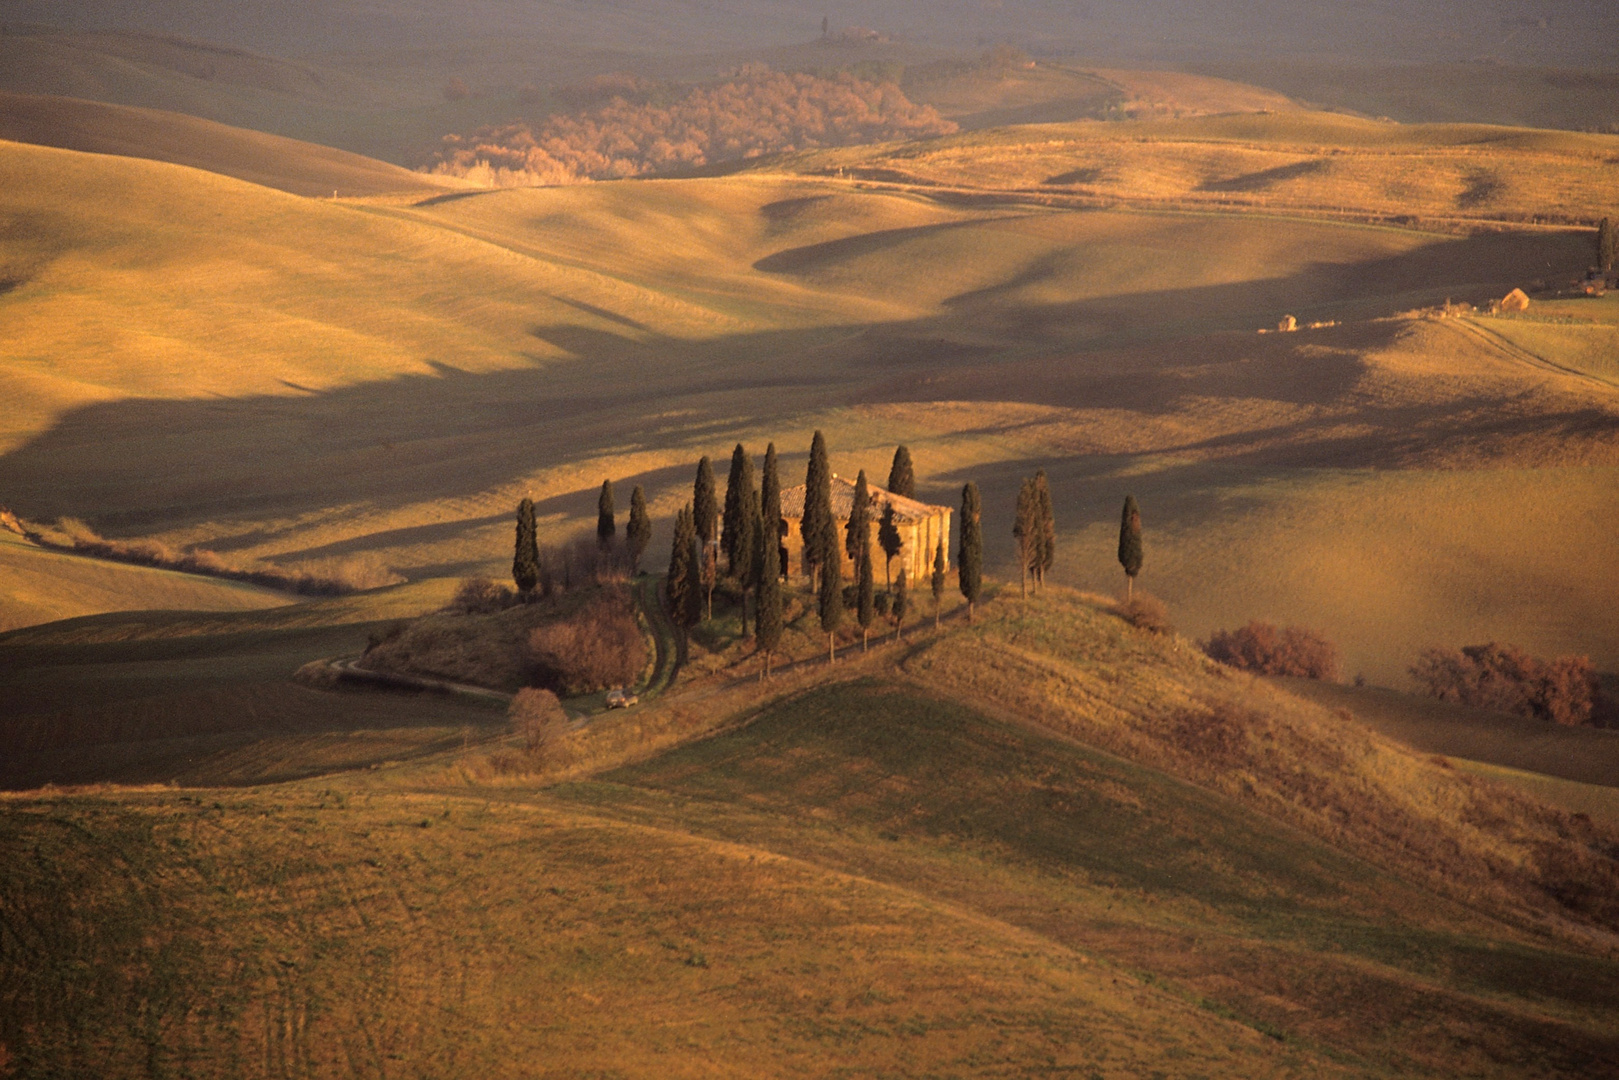 Podere Belvedere - Val d' Orcia